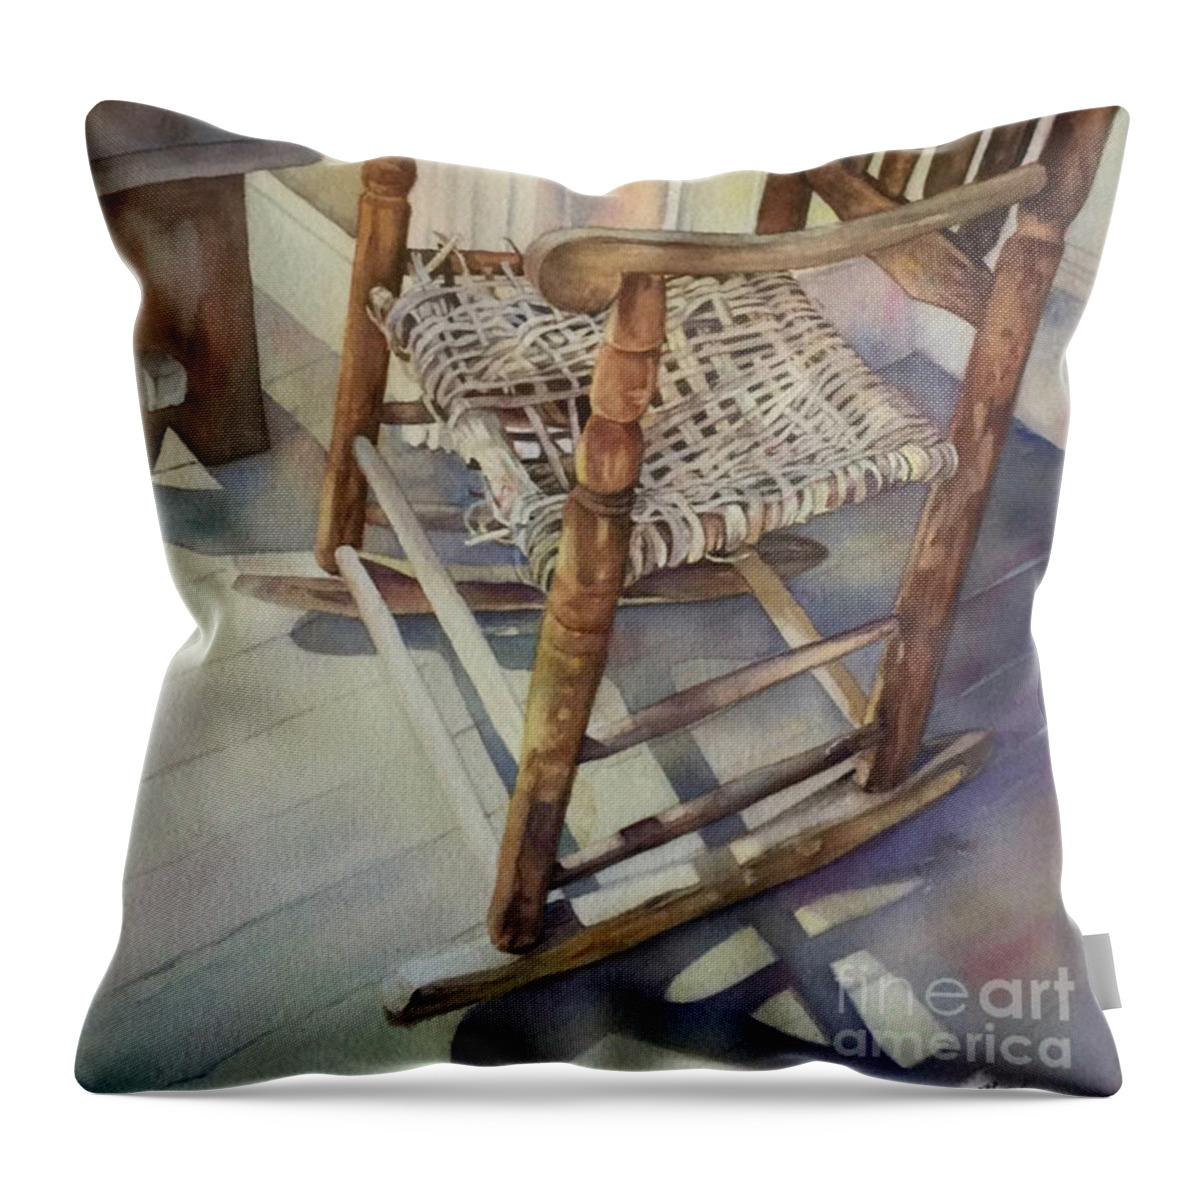 Rocking Chair Throw Pillow featuring the painting Rocking Chair by Francoise Chauray